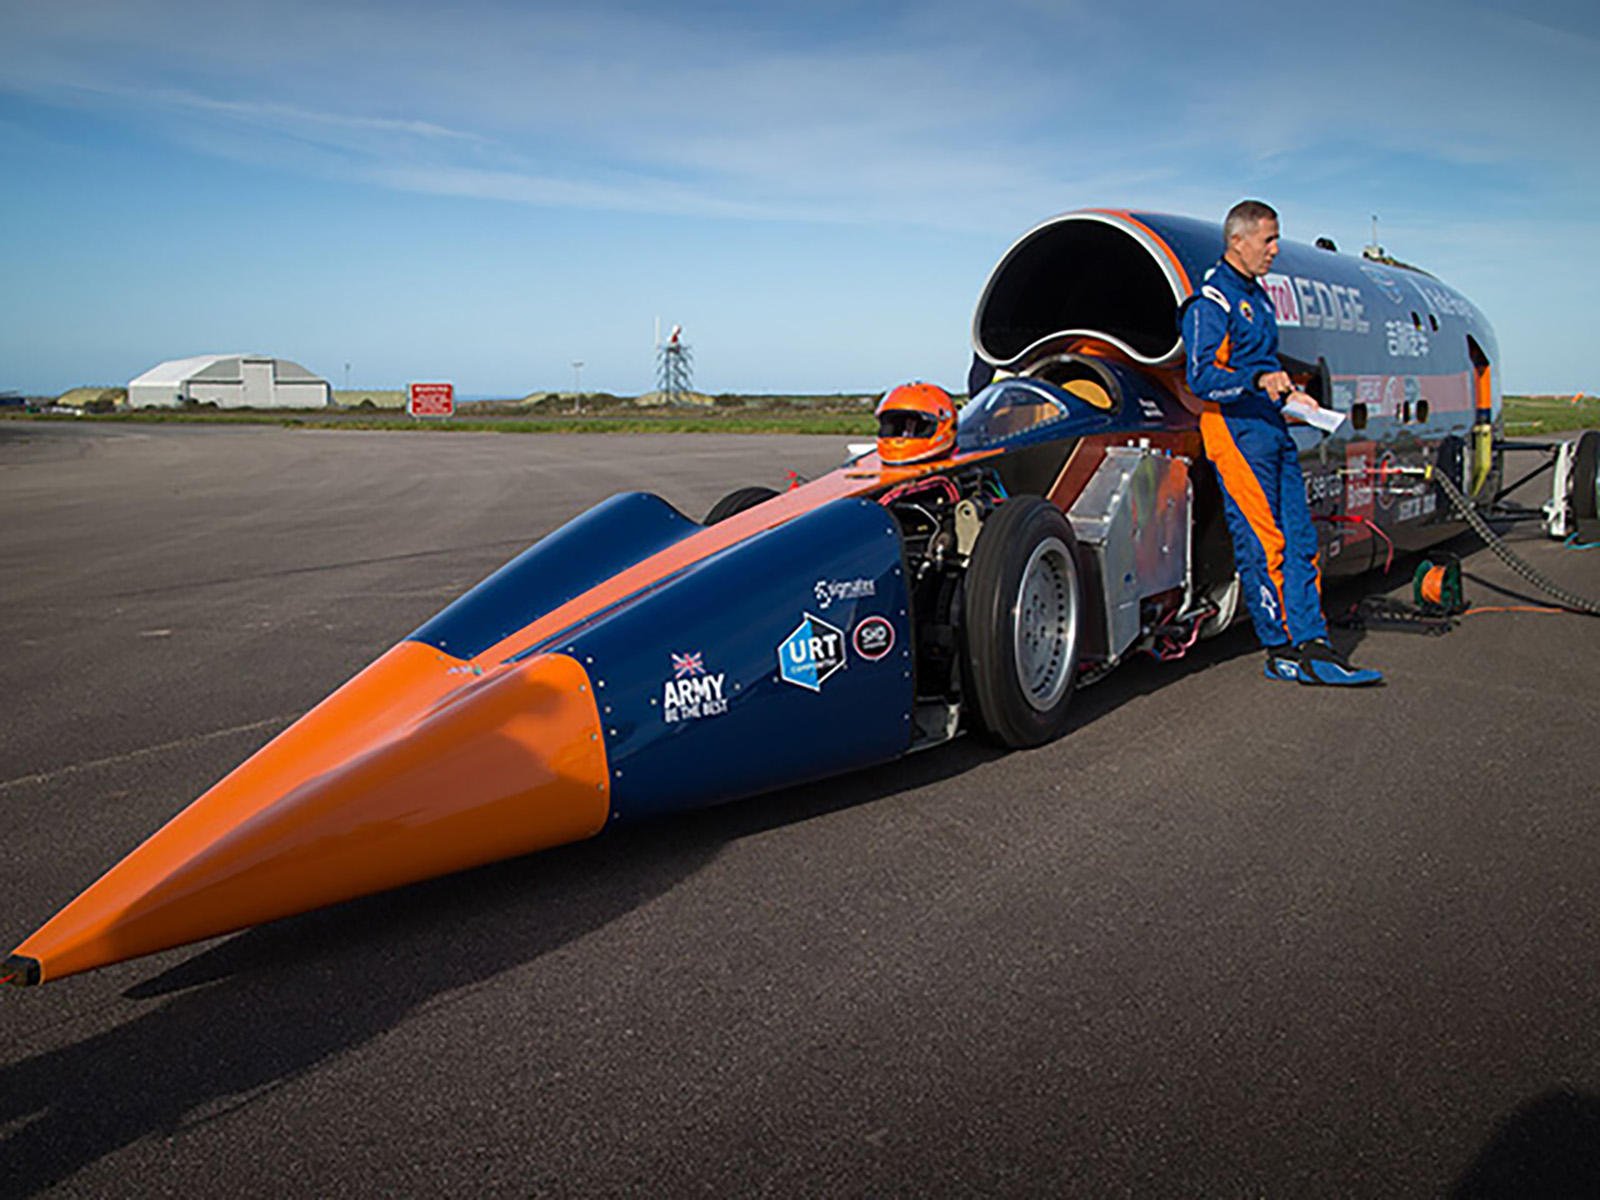 1000MPH Bloodhound Jet Car Project Is Back On CarBuzz